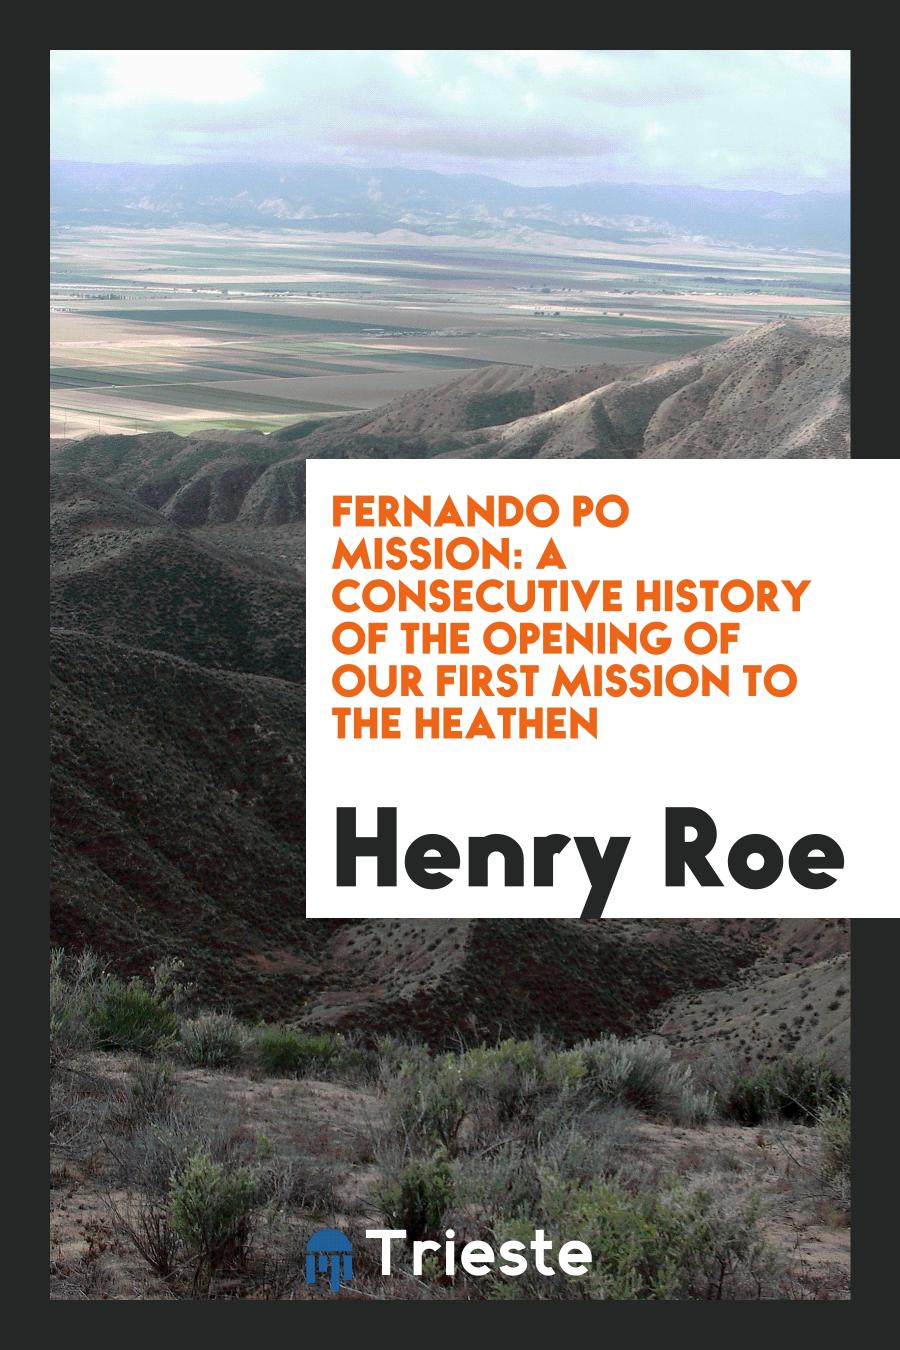 Fernando Po Mission: A Consecutive History of the Opening of our First Mission to the Heathen